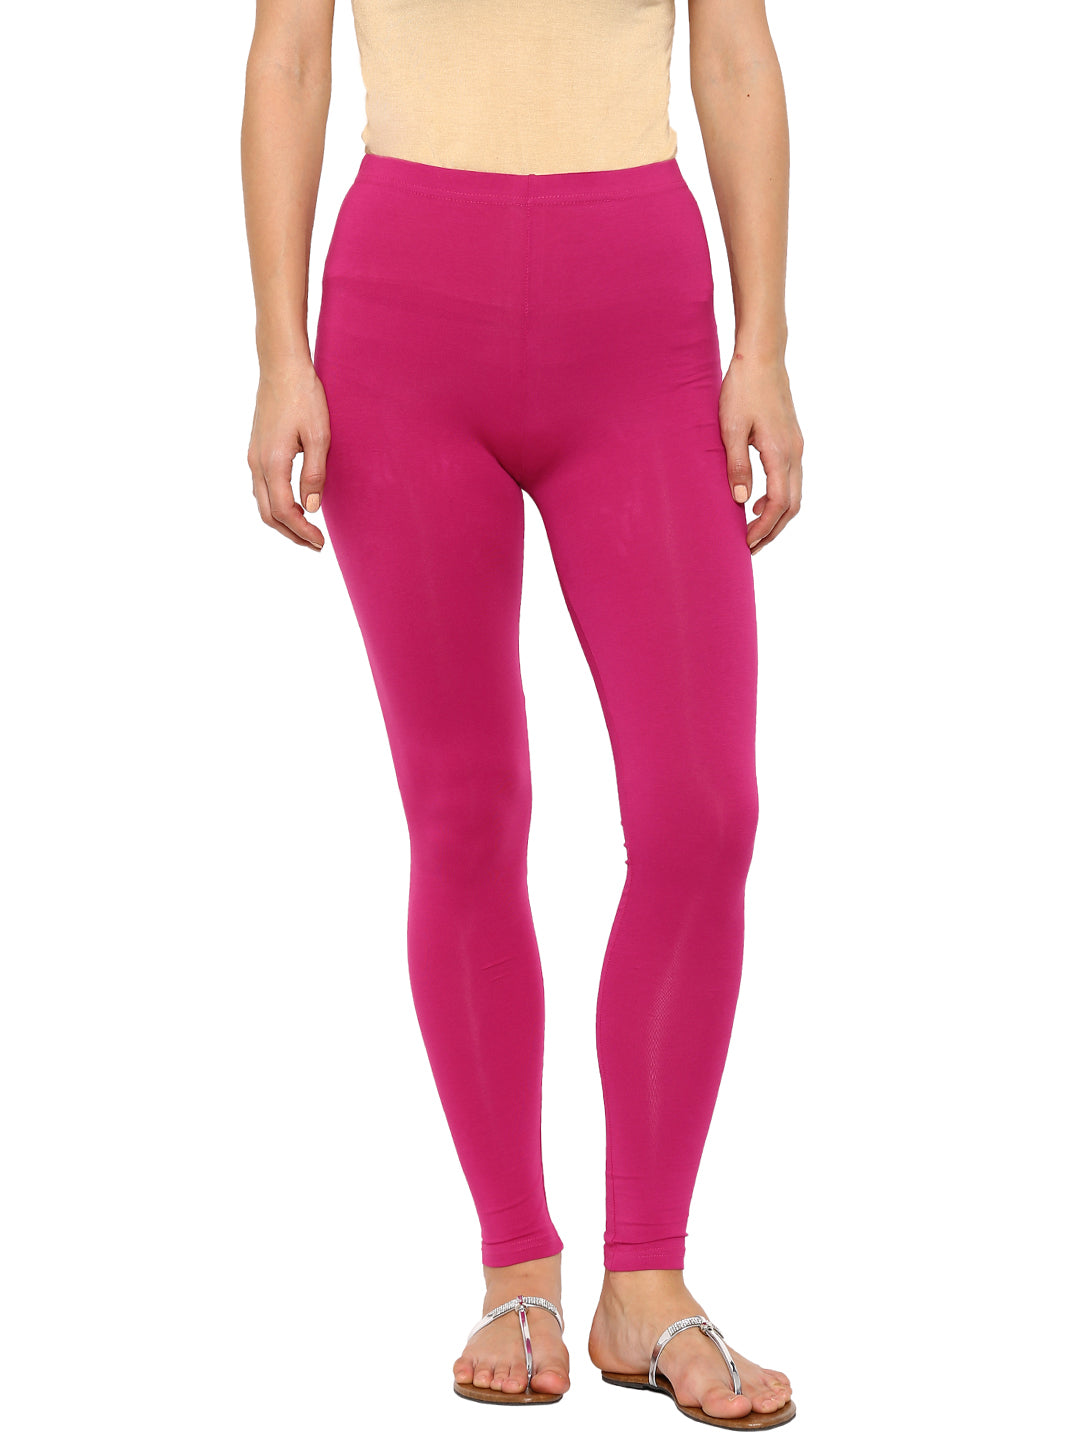 Buy Solid Hot Pink Cotton Churidar Length Premium Leggings for Women, High  Waisted, Non-Transparent